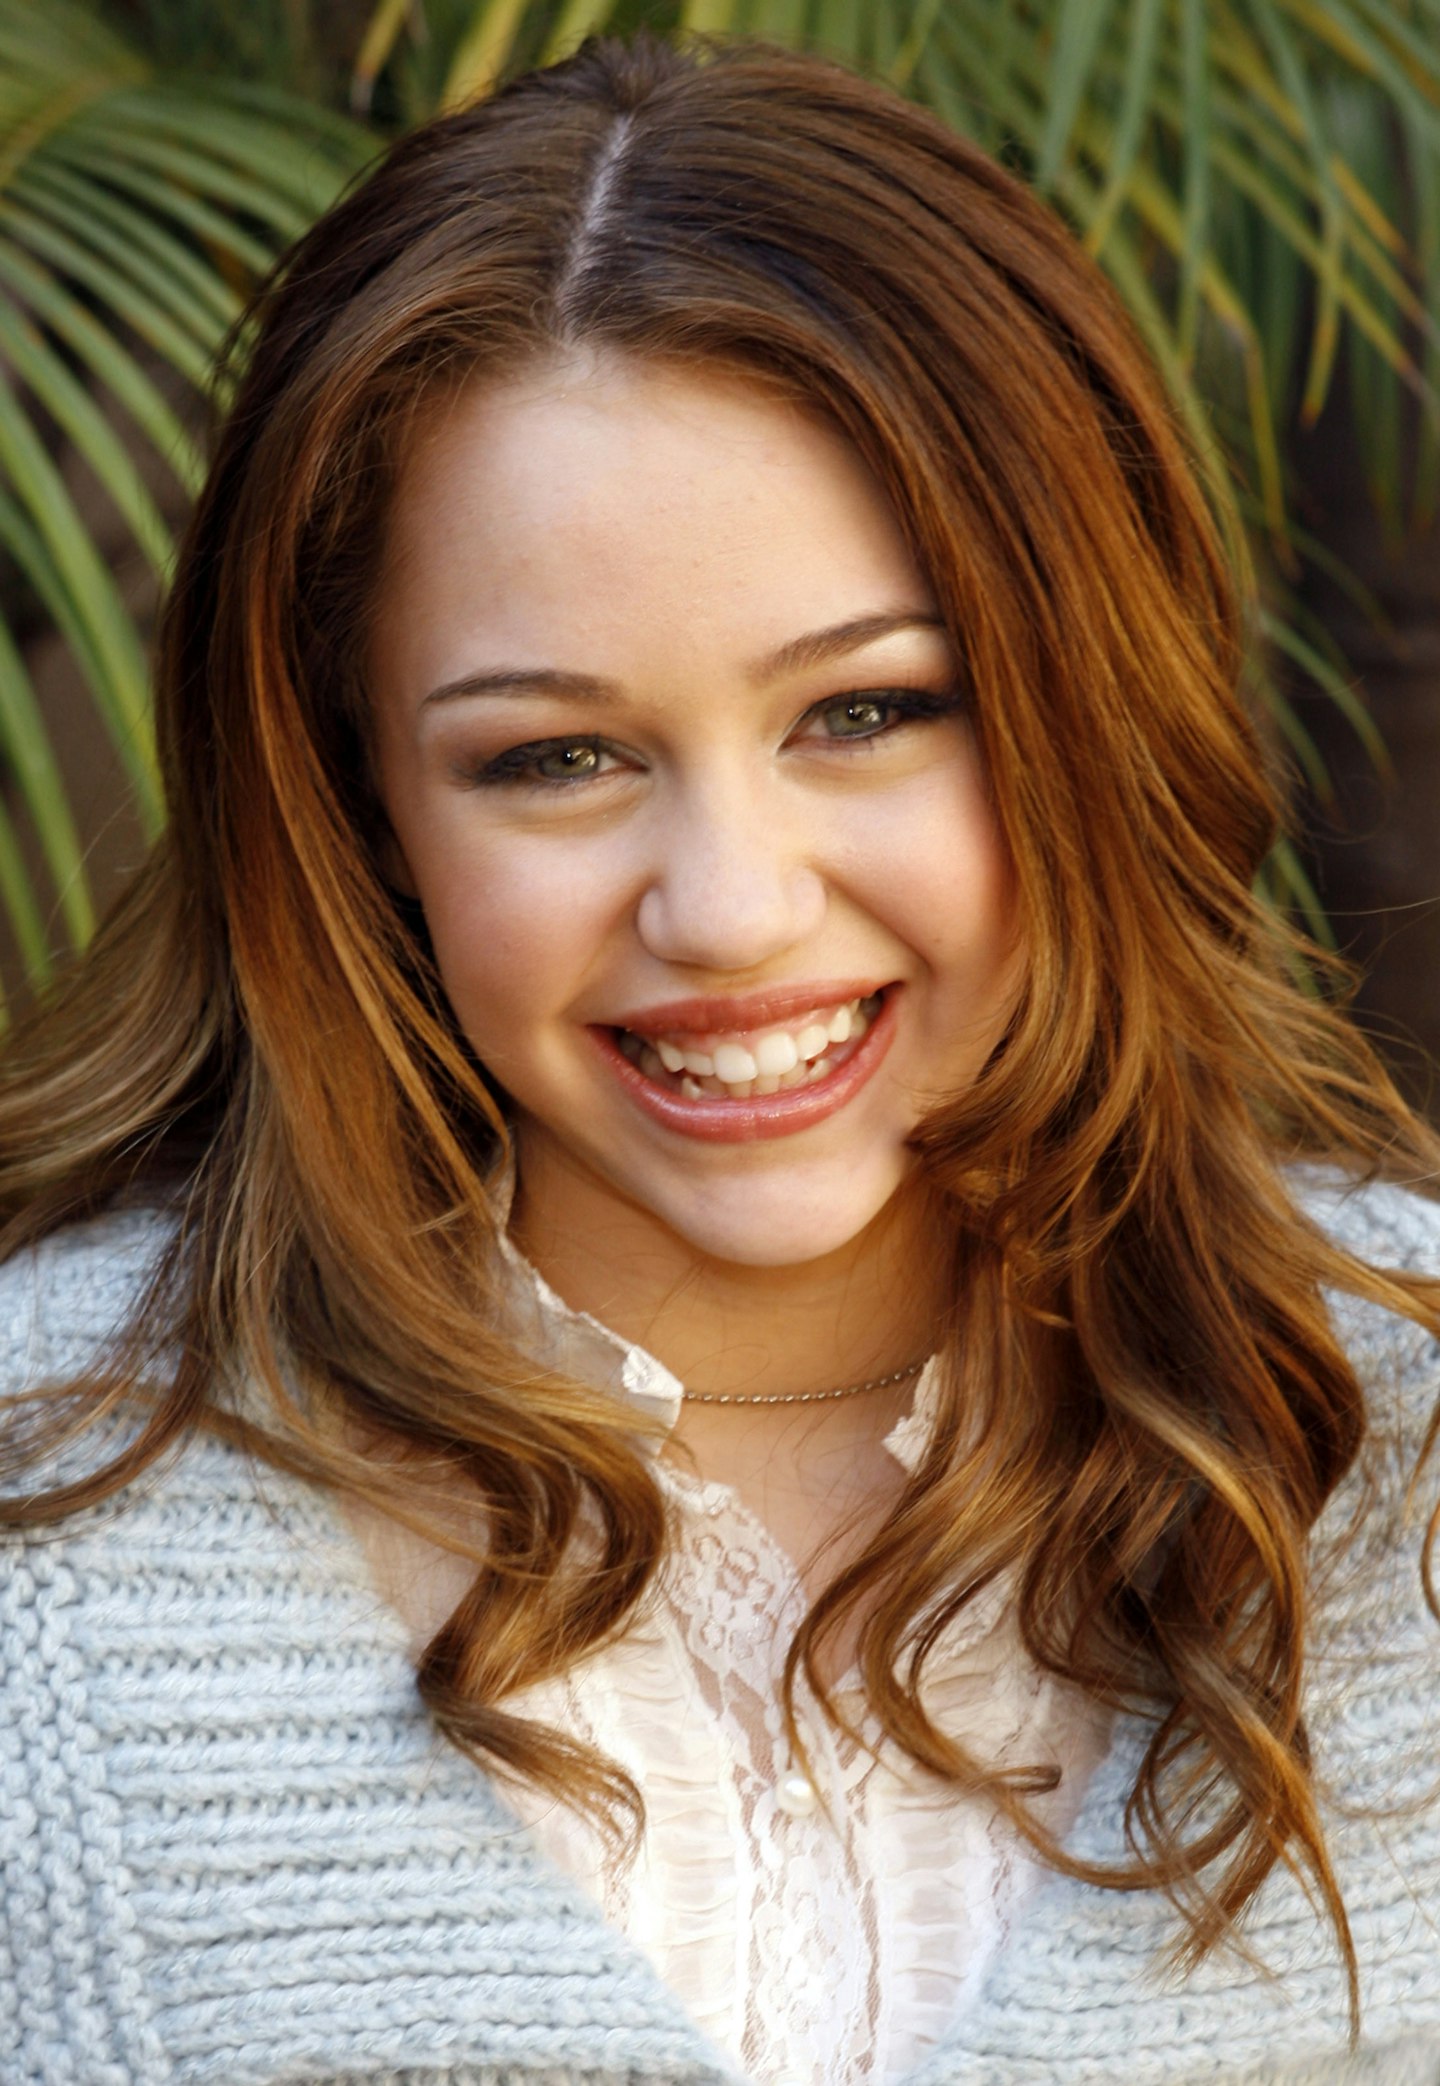 Miley Cyrus before